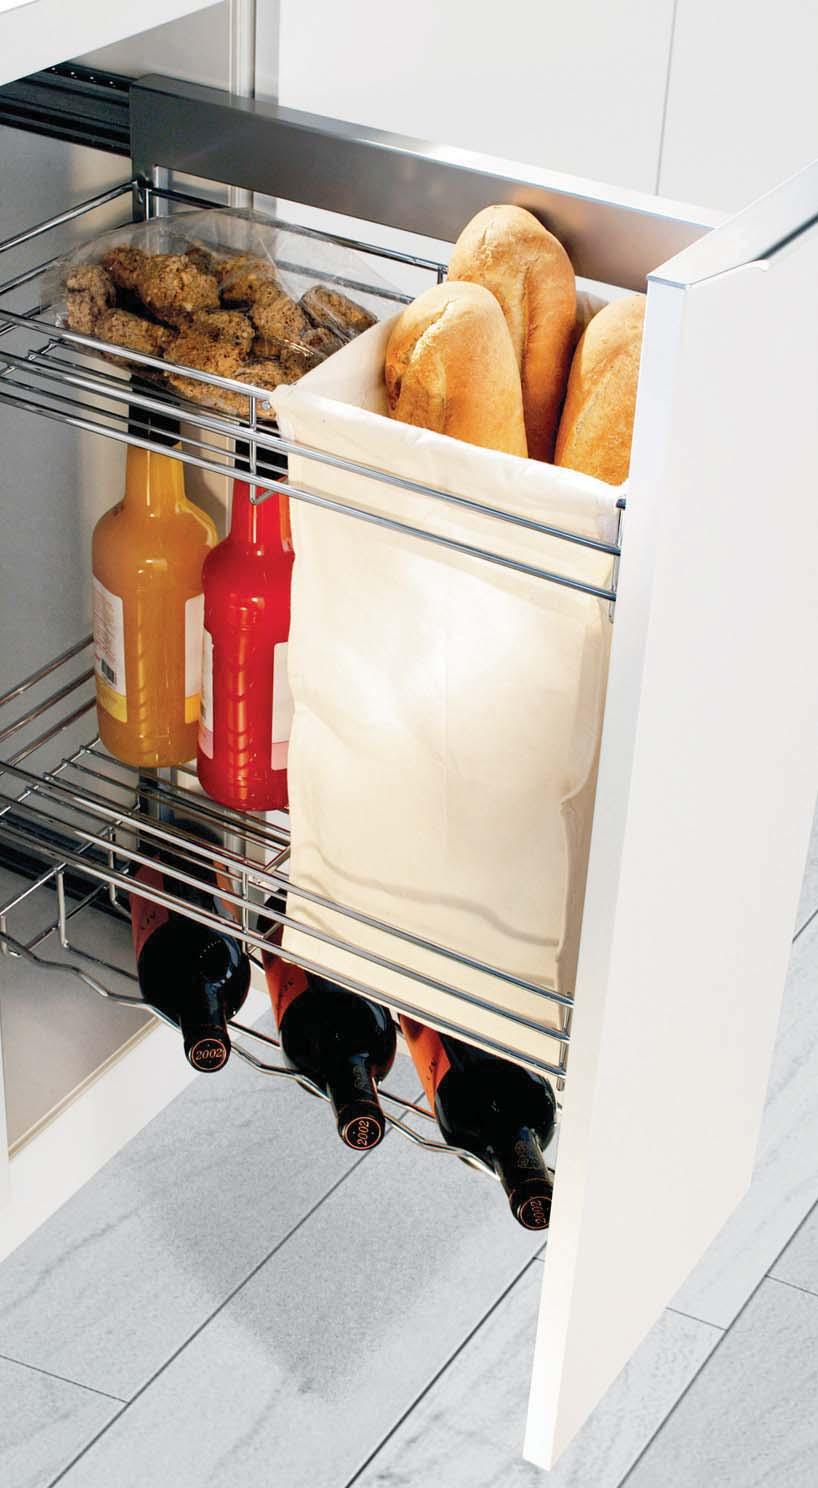 With BREAD AND BOTTLE BASKET Complete set with full extension frame, 1 bottle rack, 2 baskets with 1 bag for bread.